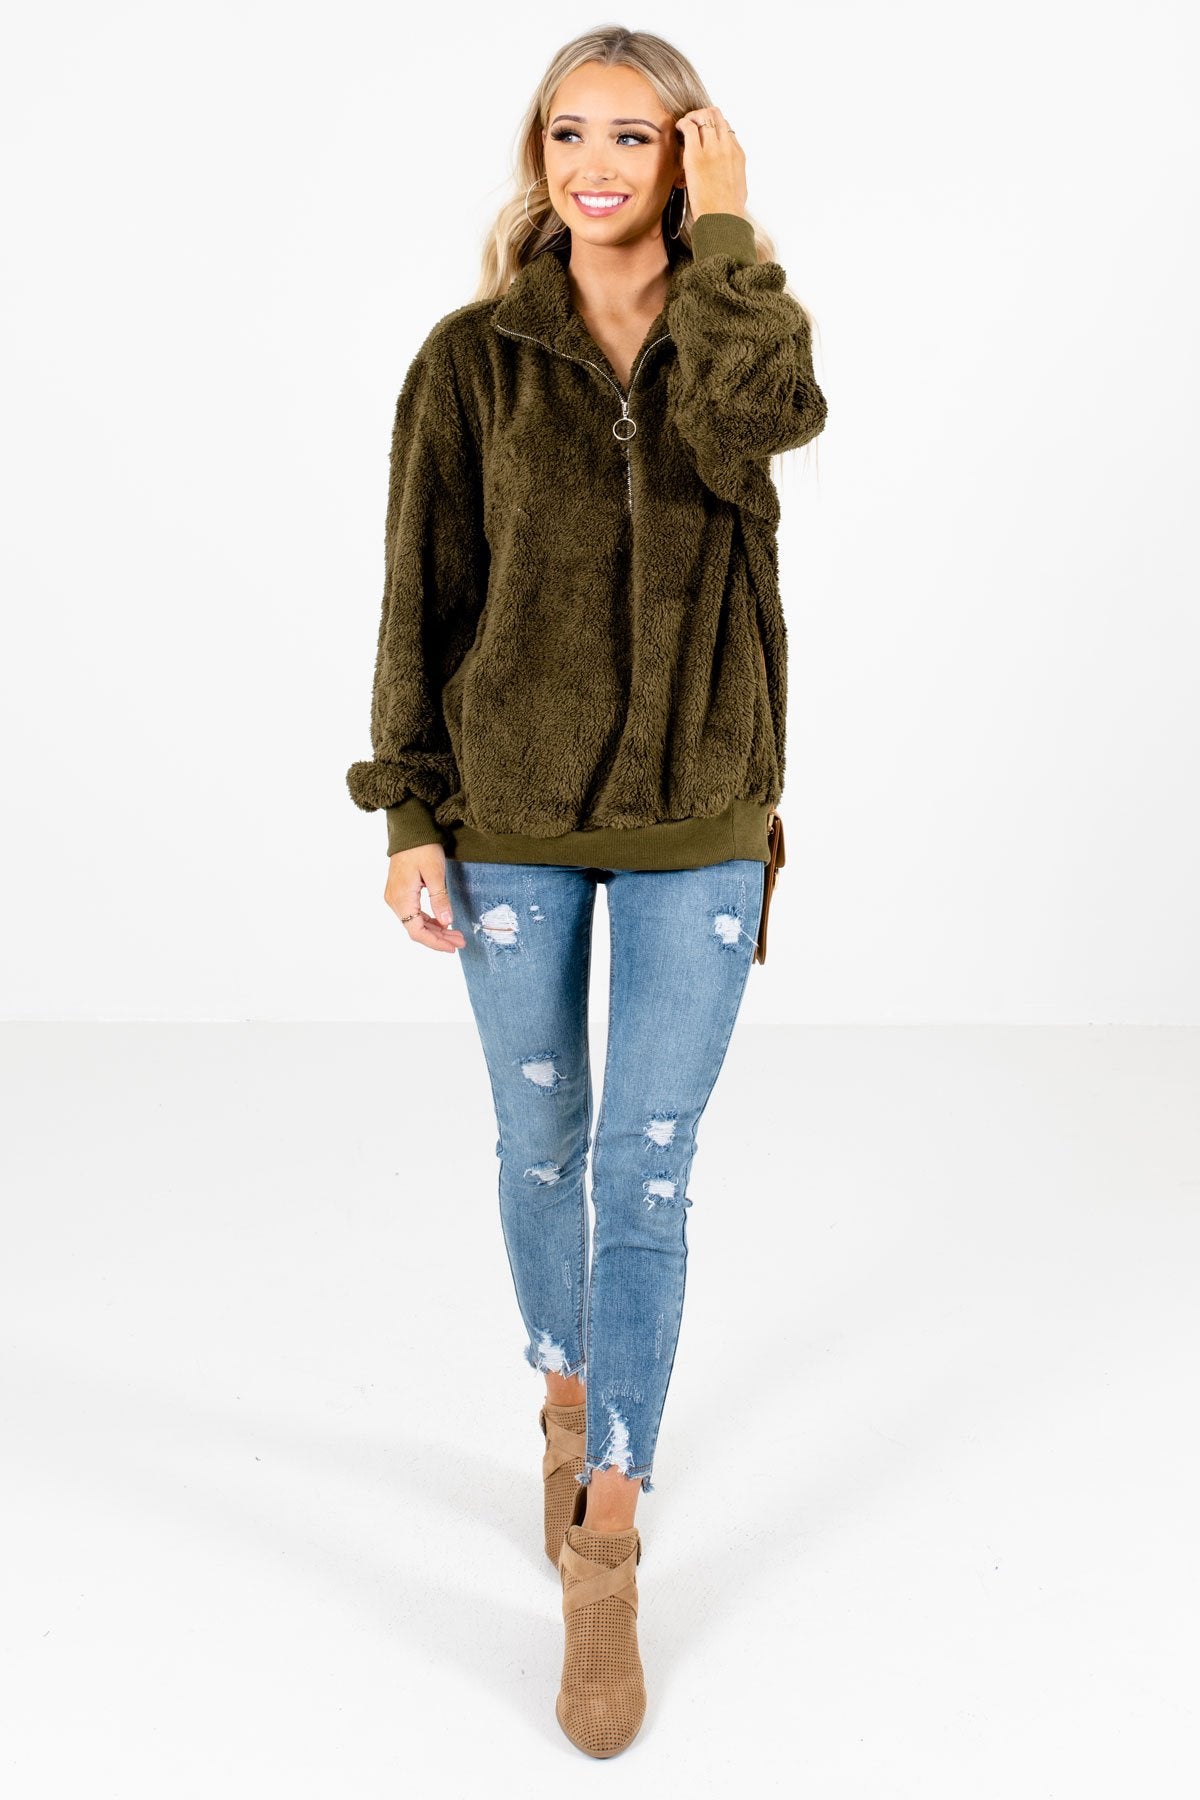 Women’s Olive Green Fall and Winter Boutique Clothing